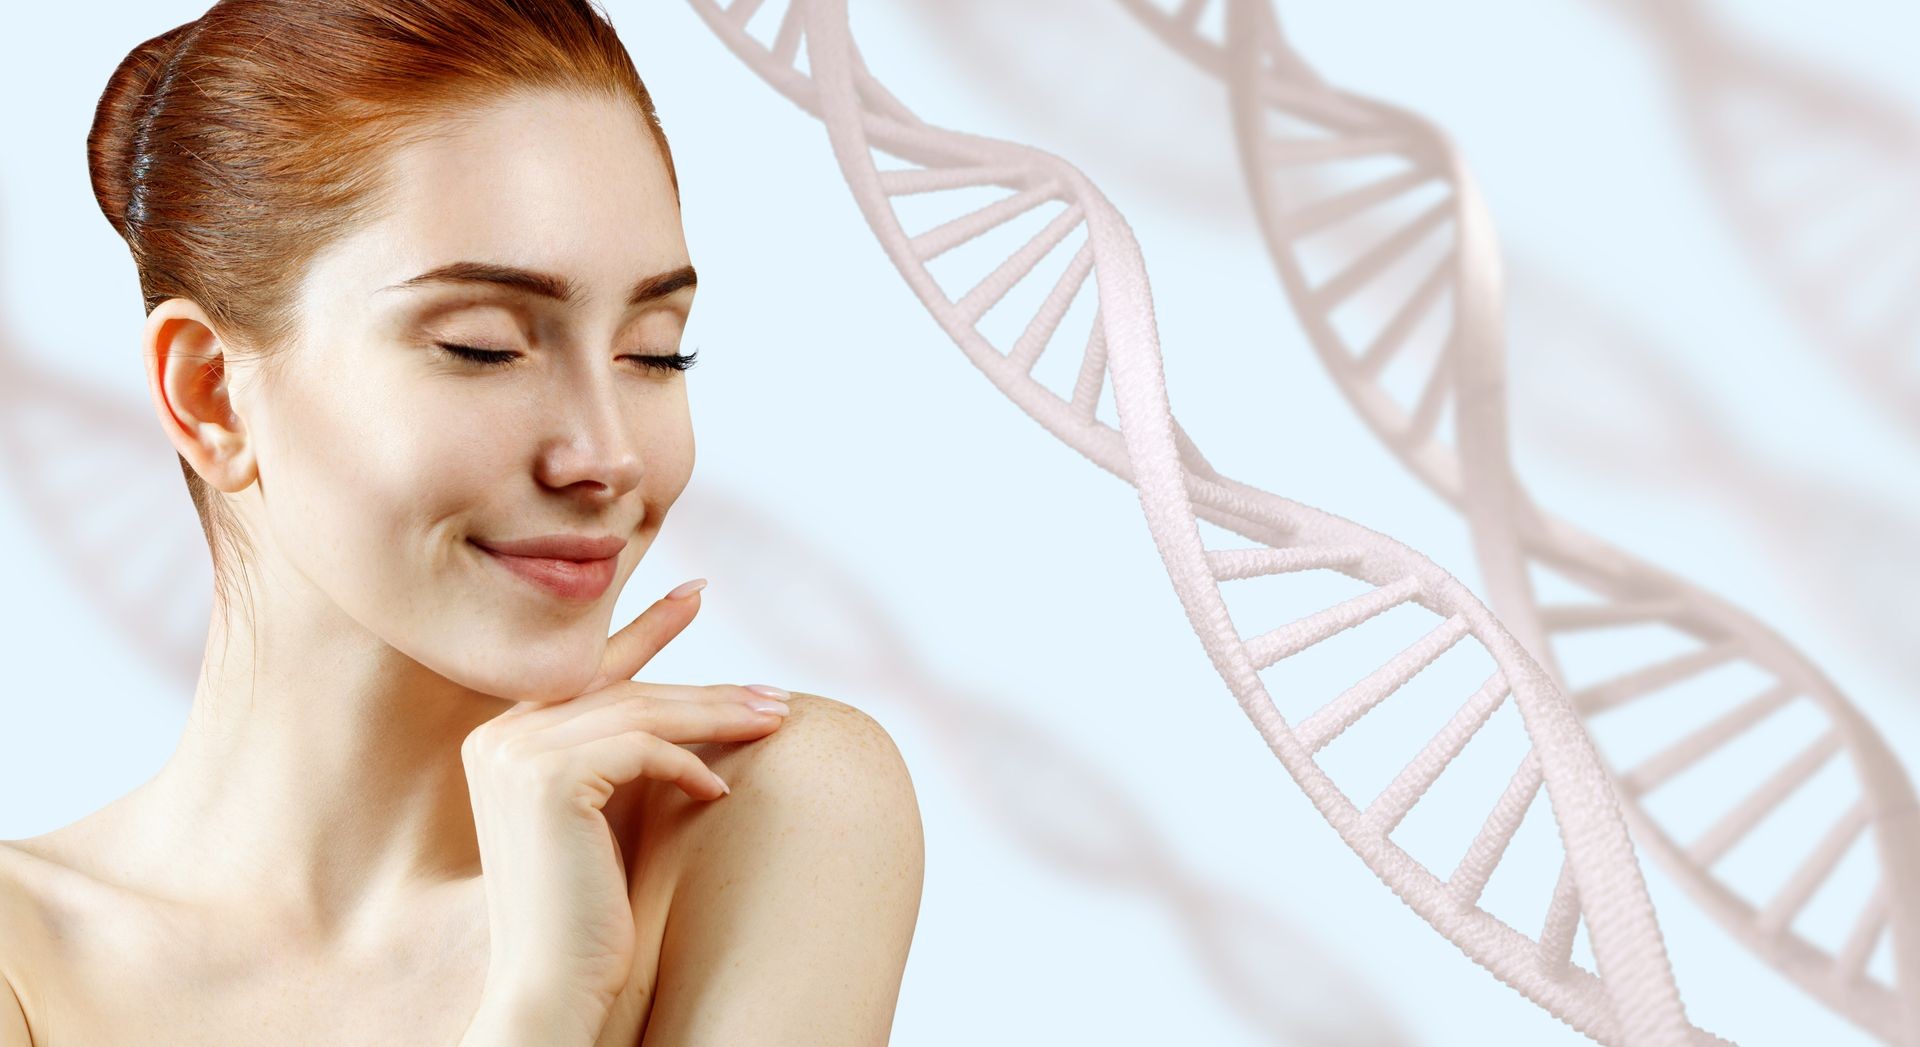 Portrait of sensual woman among DNA chains. Over blue background